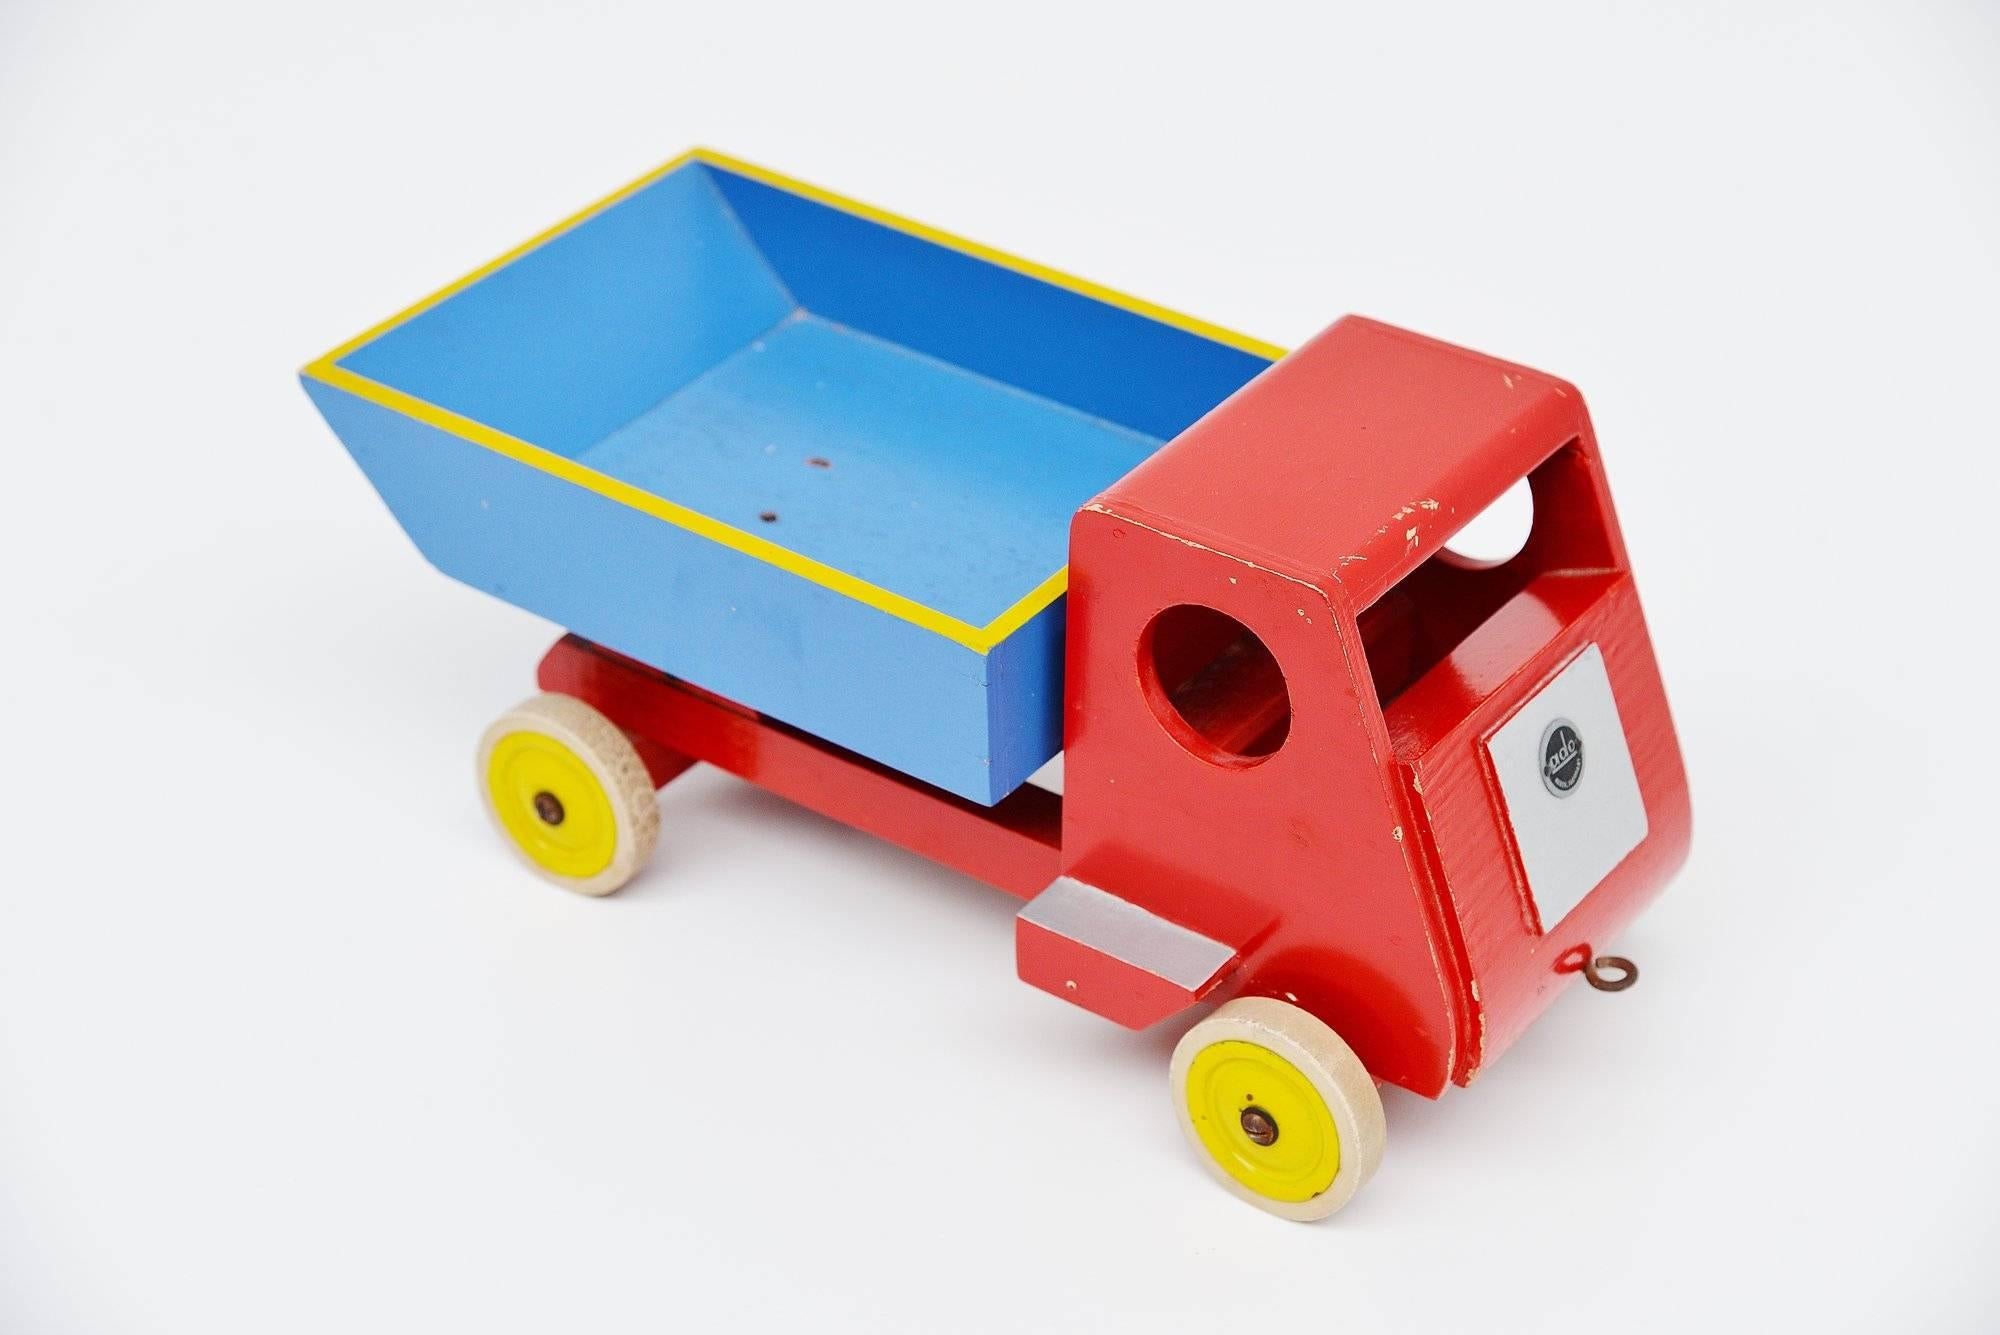 ery nice toy tilt truck designed by Ko Verzuu for Ado Holland in 1951. Ado means Arbeid door onvolwaardigen, translated; labor by incapacitated, which makes this an even more special piece. Toys by Ado are being highly collected at the moment, even